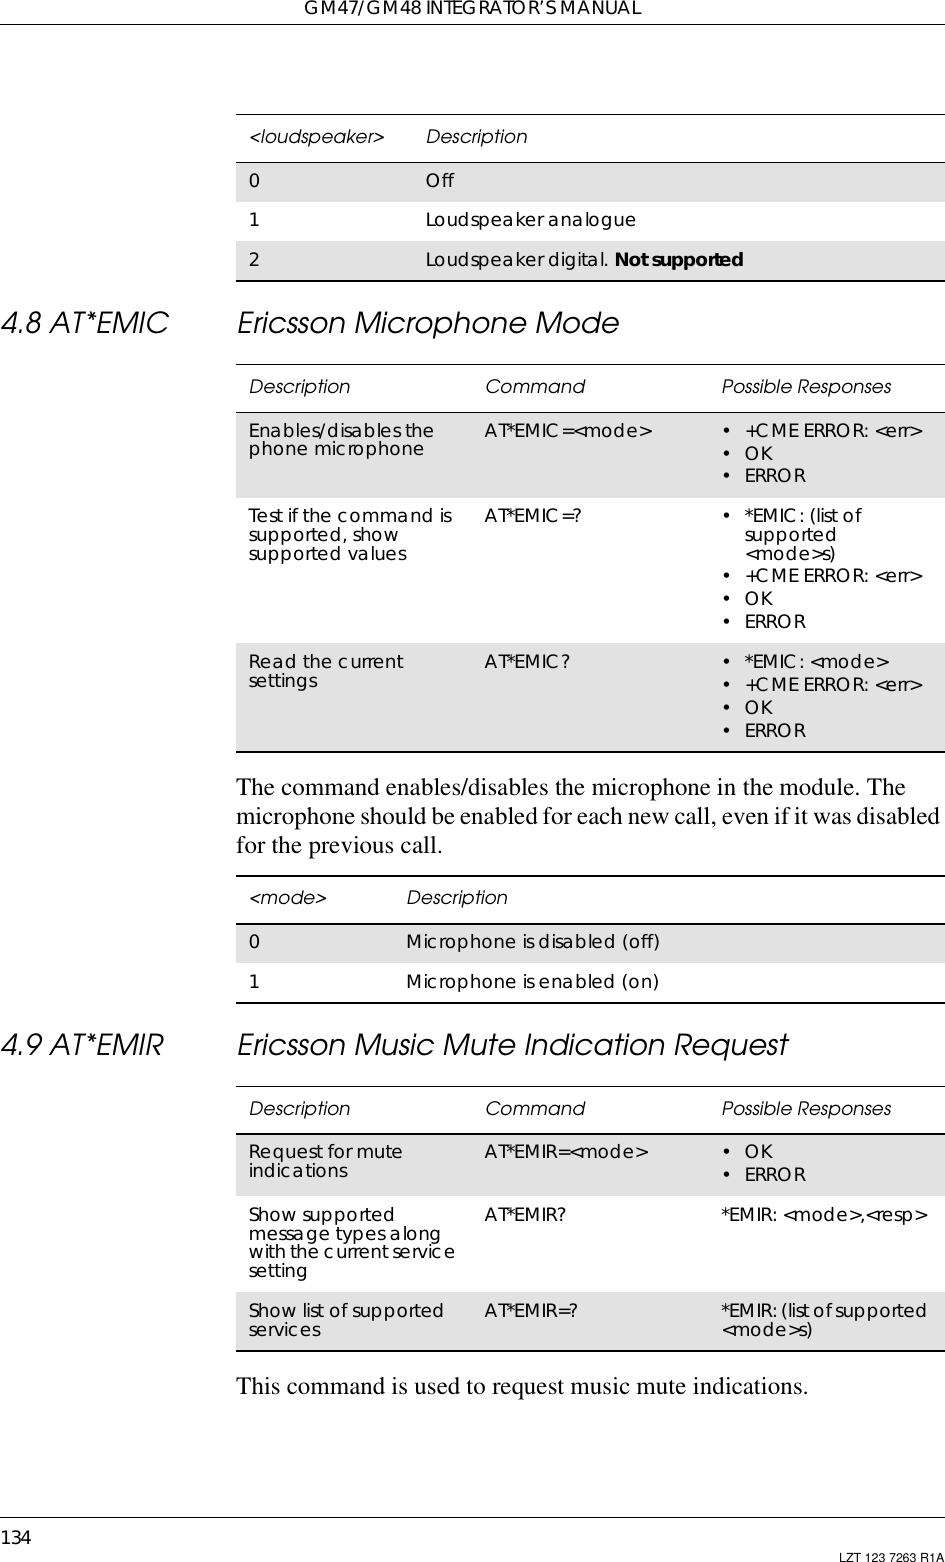 GM47/GM48 INTEGRATOR’S MANUAL134 LZT 123 7263 R1A4.8 AT*EMIC Ericsson Microphone ModeThe command enables/disables the microphone in the module. Themicrophone should be enabled for each new call, even if it was disabledfor the previous call.4.9 AT*EMIR Ericsson Music Mute Indication RequestThis command is used to request music mute indications.&lt;loudspeaker&gt; Description0Off1Loudspeaker analogue2Loudspeaker digital. Not supportedDescription Command Possible ResponsesEnables/disables thephone microphone AT*EMIC=&lt;mode&gt; •+CMEERROR:&lt;err&gt;•OK•ERRORTest if the command issupported, showsupported valuesAT*EMIC=? •*EMIC:(listofsupported&lt;mode&gt;s)•+CMEERROR:&lt;err&gt;•OK•ERRORRead the currentsettings AT*EMIC? •*EMIC:&lt;mode&gt;•+CMEERROR:&lt;err&gt;•OK•ERROR&lt;mode&gt; Description0Microphone is disabled (off)1Microphone is enabled (on)Description Command Possible ResponsesRequest for muteindications AT*EMIR=&lt;mode&gt; •OK•ERRORShow supportedmessage types alongwith the current servicesettingAT*EMIR? *EMIR: &lt;mode&gt;,&lt;resp&gt;Show list of supportedservices AT*EMIR=? *EMIR: (list ofsupported&lt;mode&gt;s)